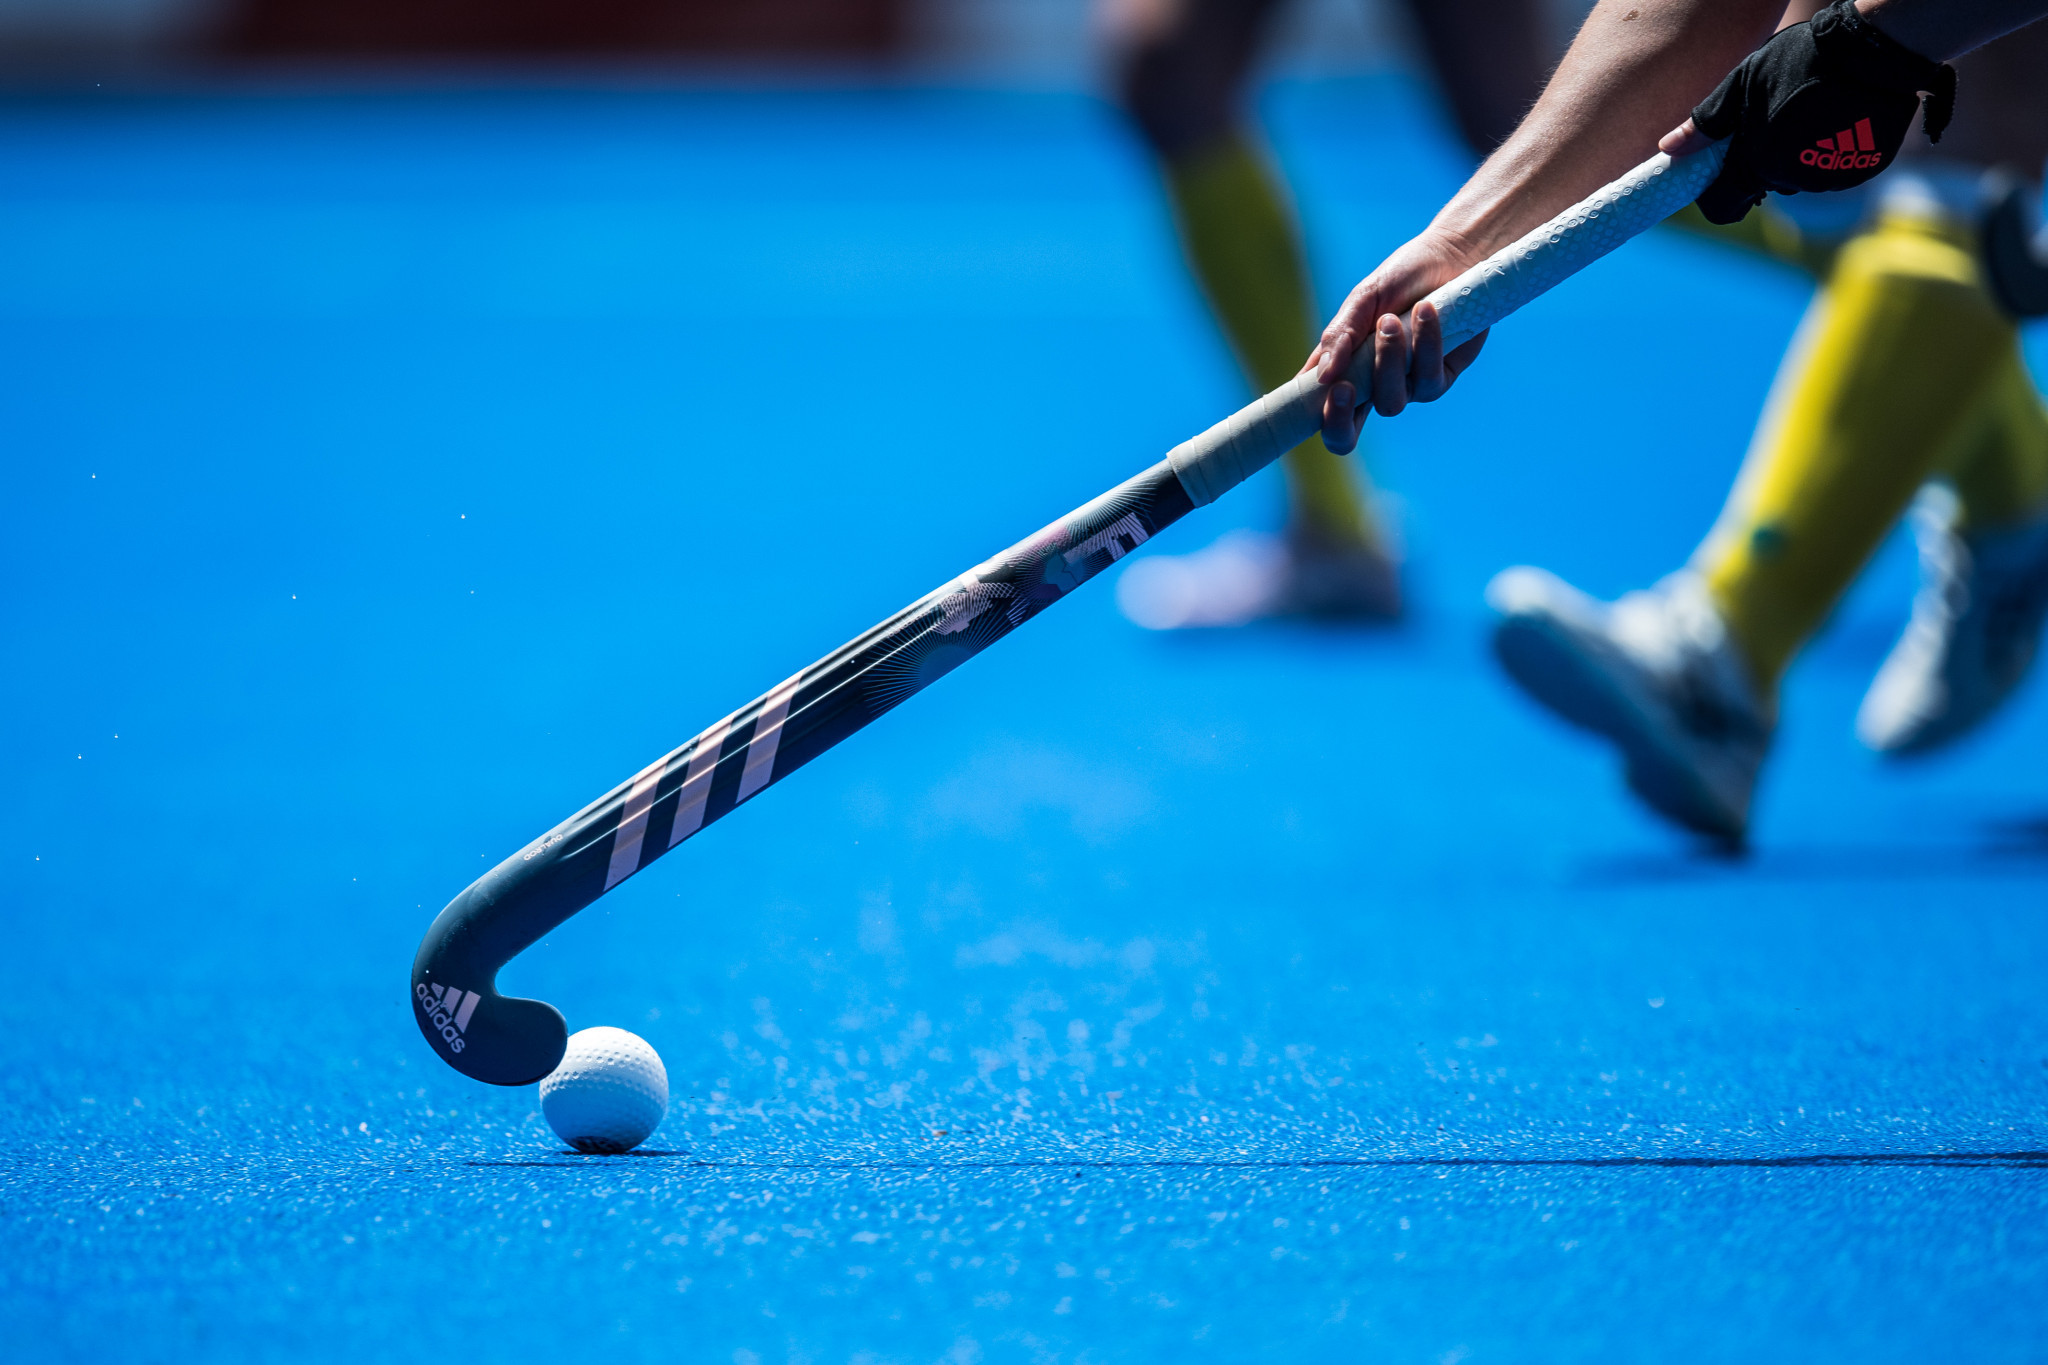 Hopes of hockey 5s investment at Warrnambool rise with Victoria 2026 officials visit